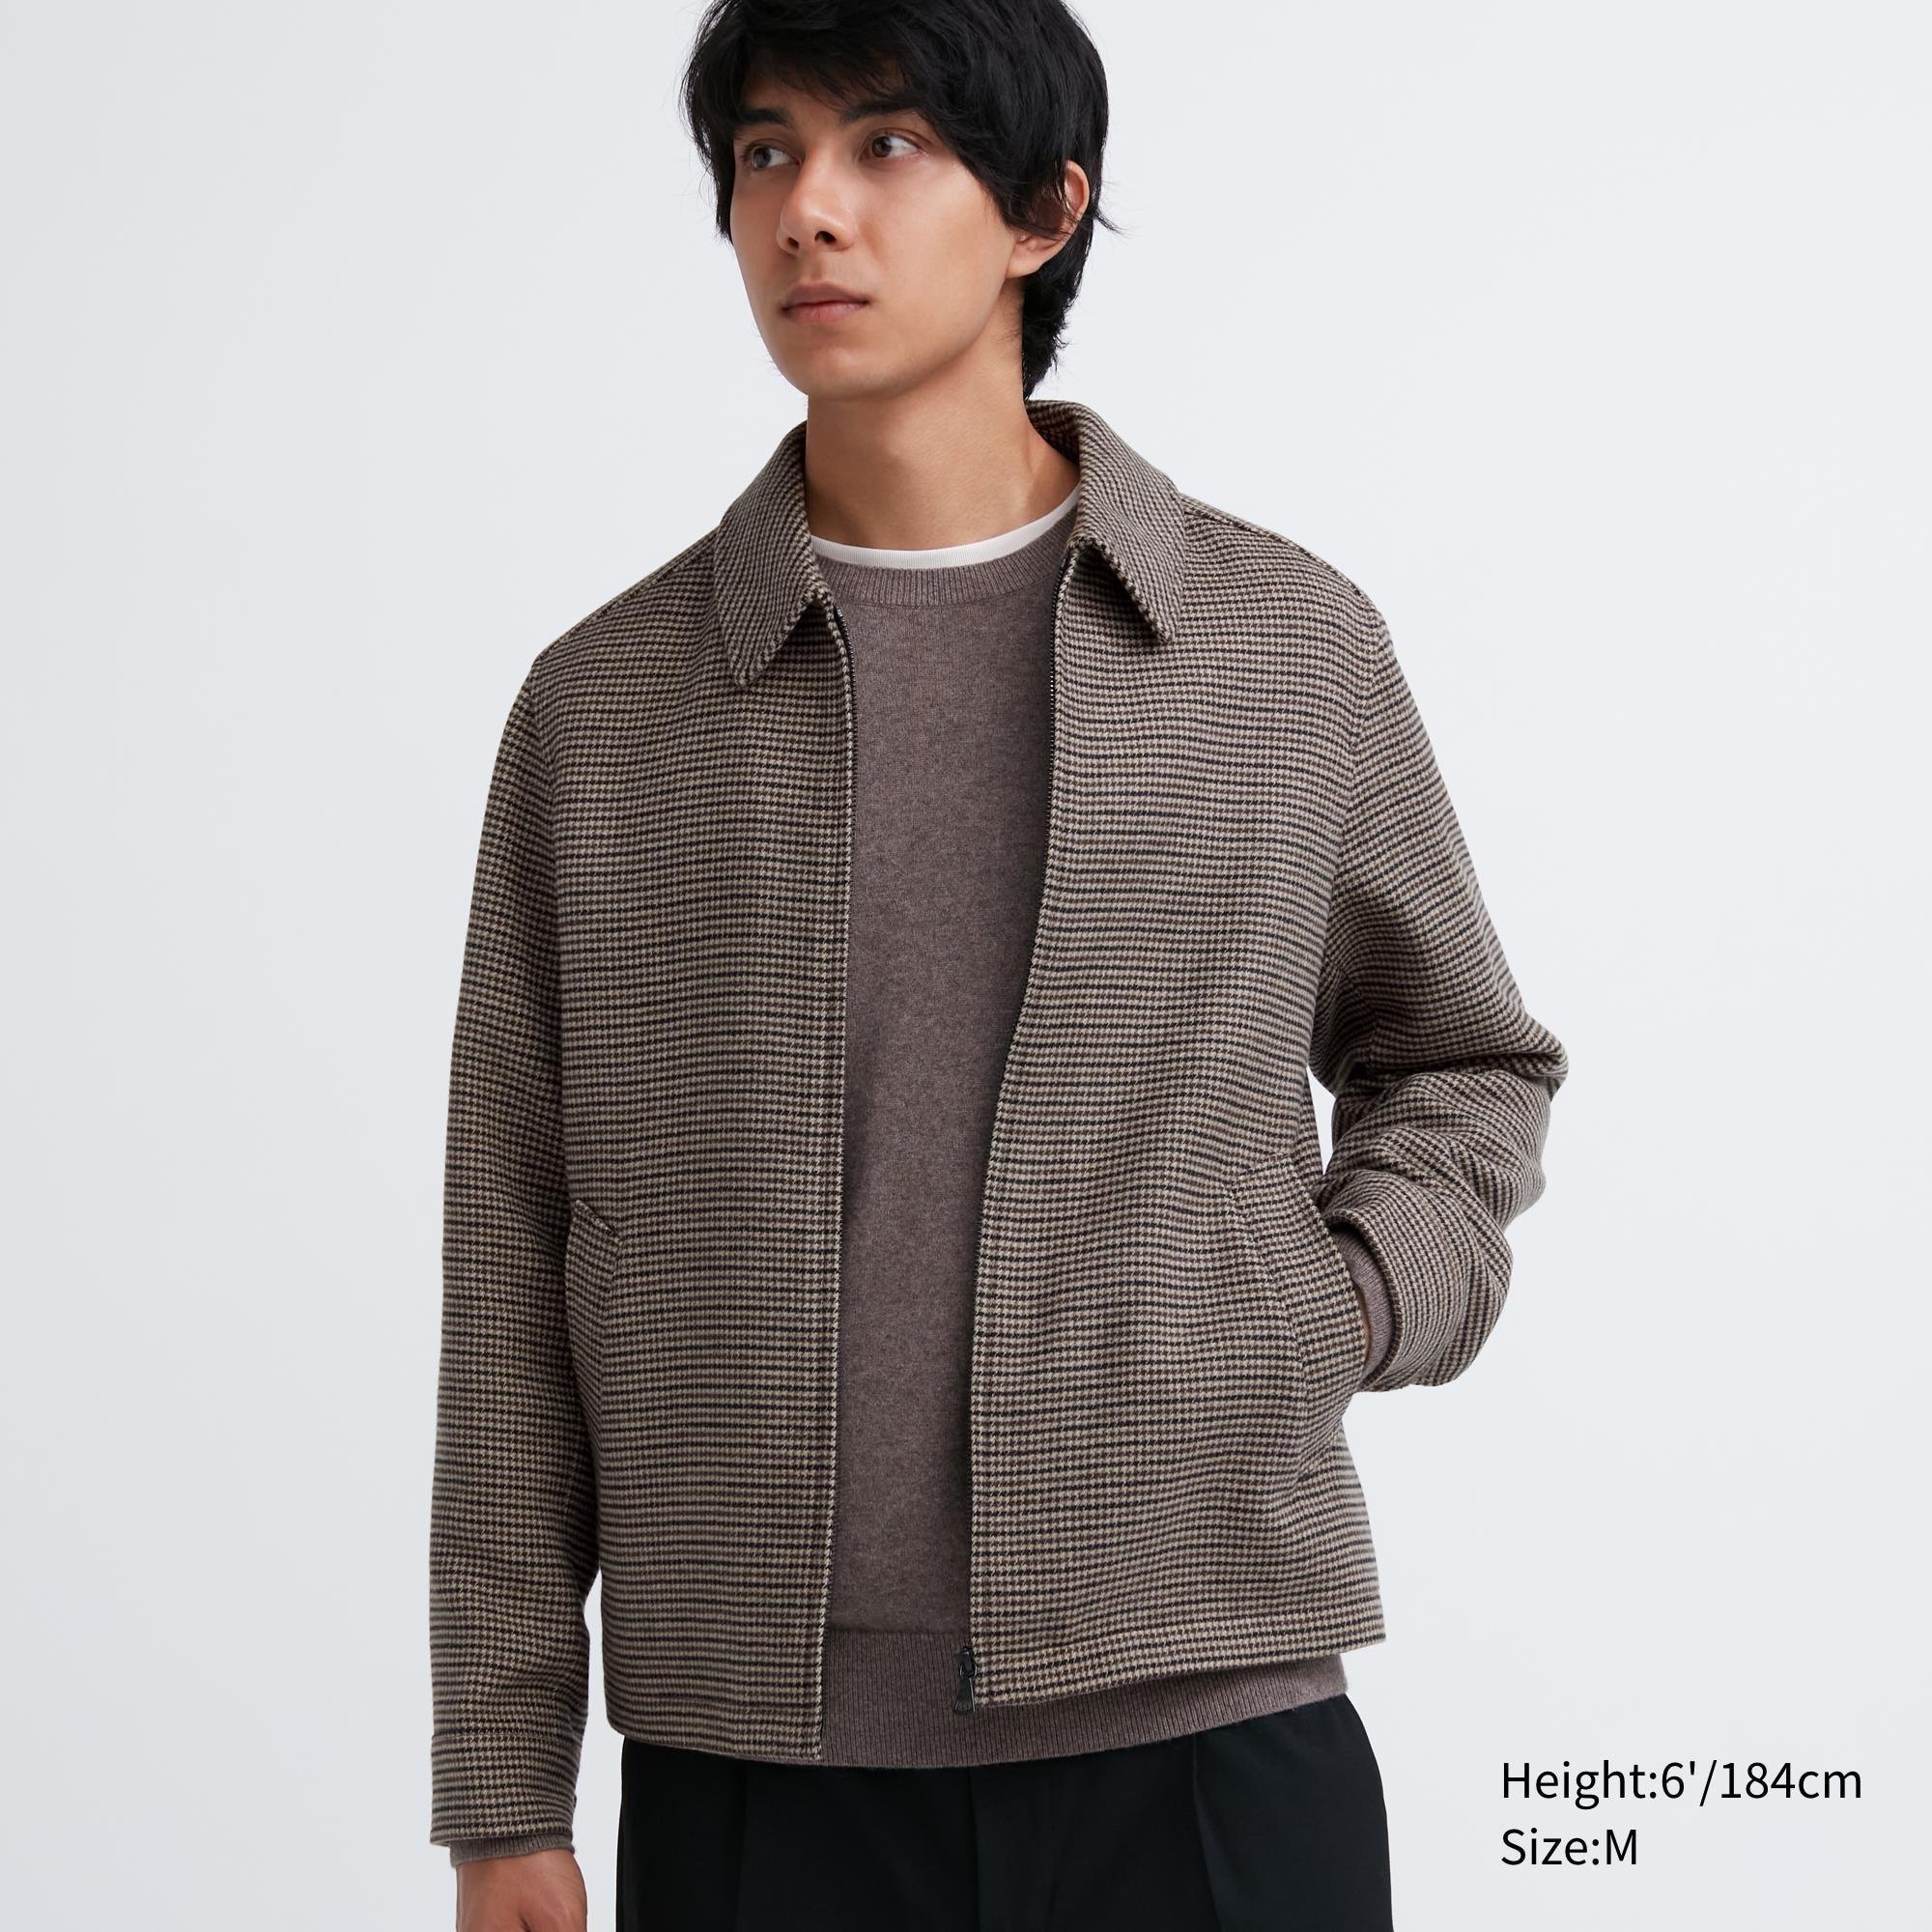 Single Collar Short Blouson (Houndstooth) by UNIQLO